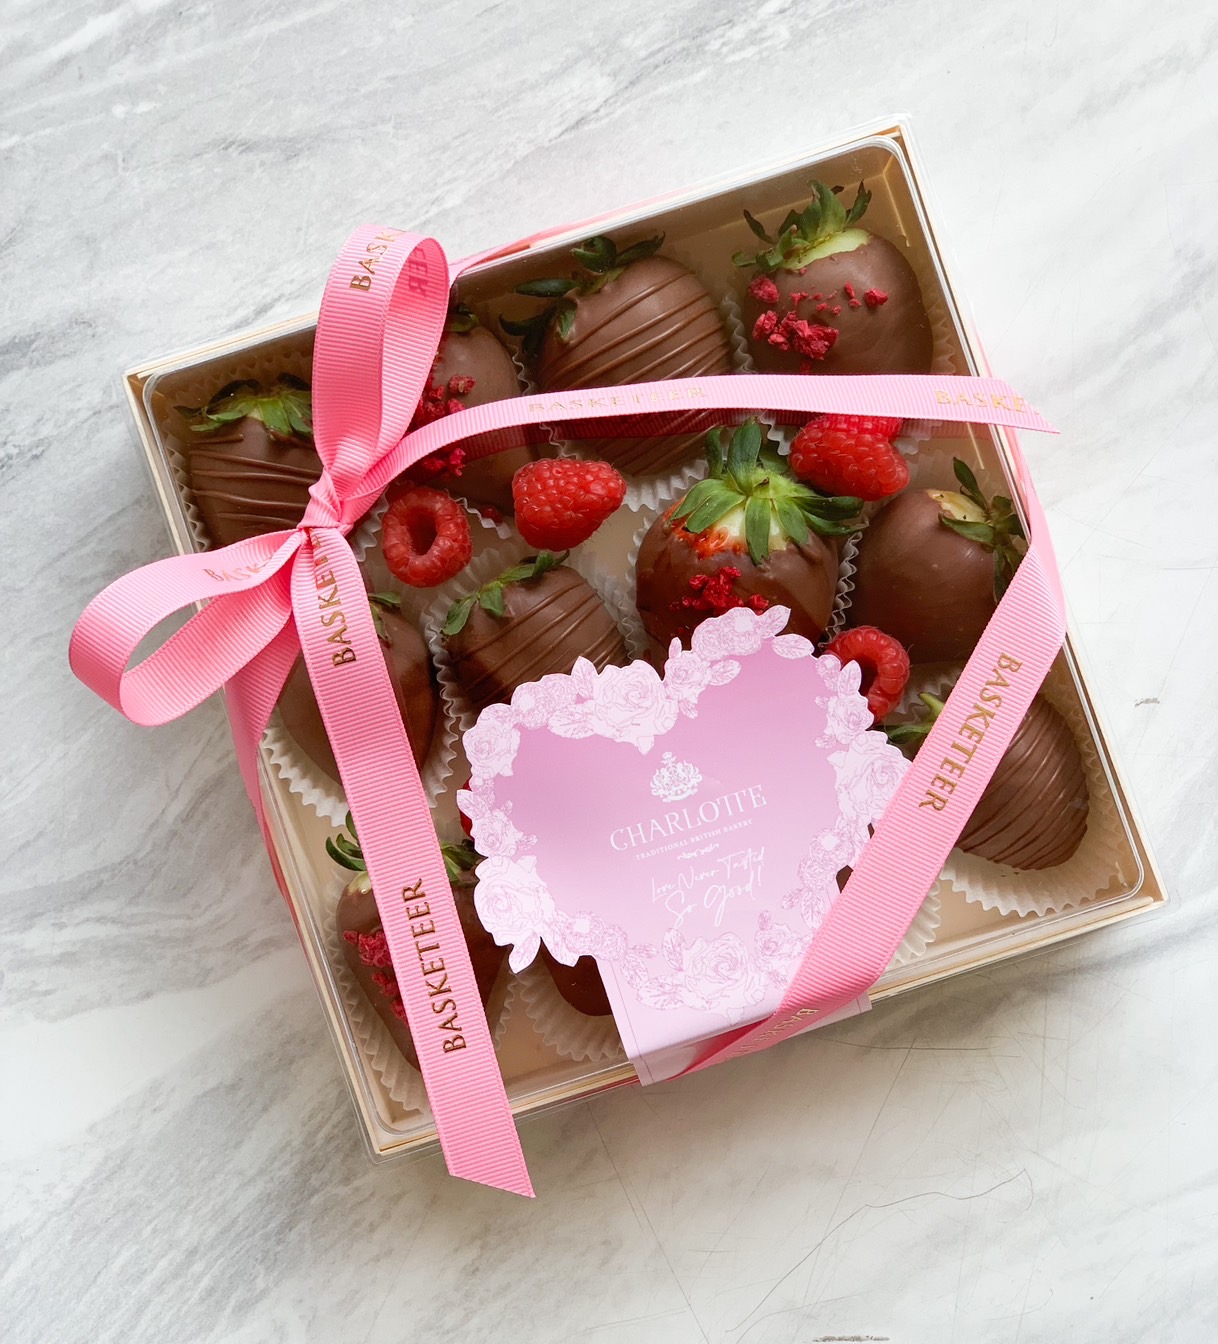 Valentine's Day Gift In Chocolate covered Strawberry Set In The White Box.